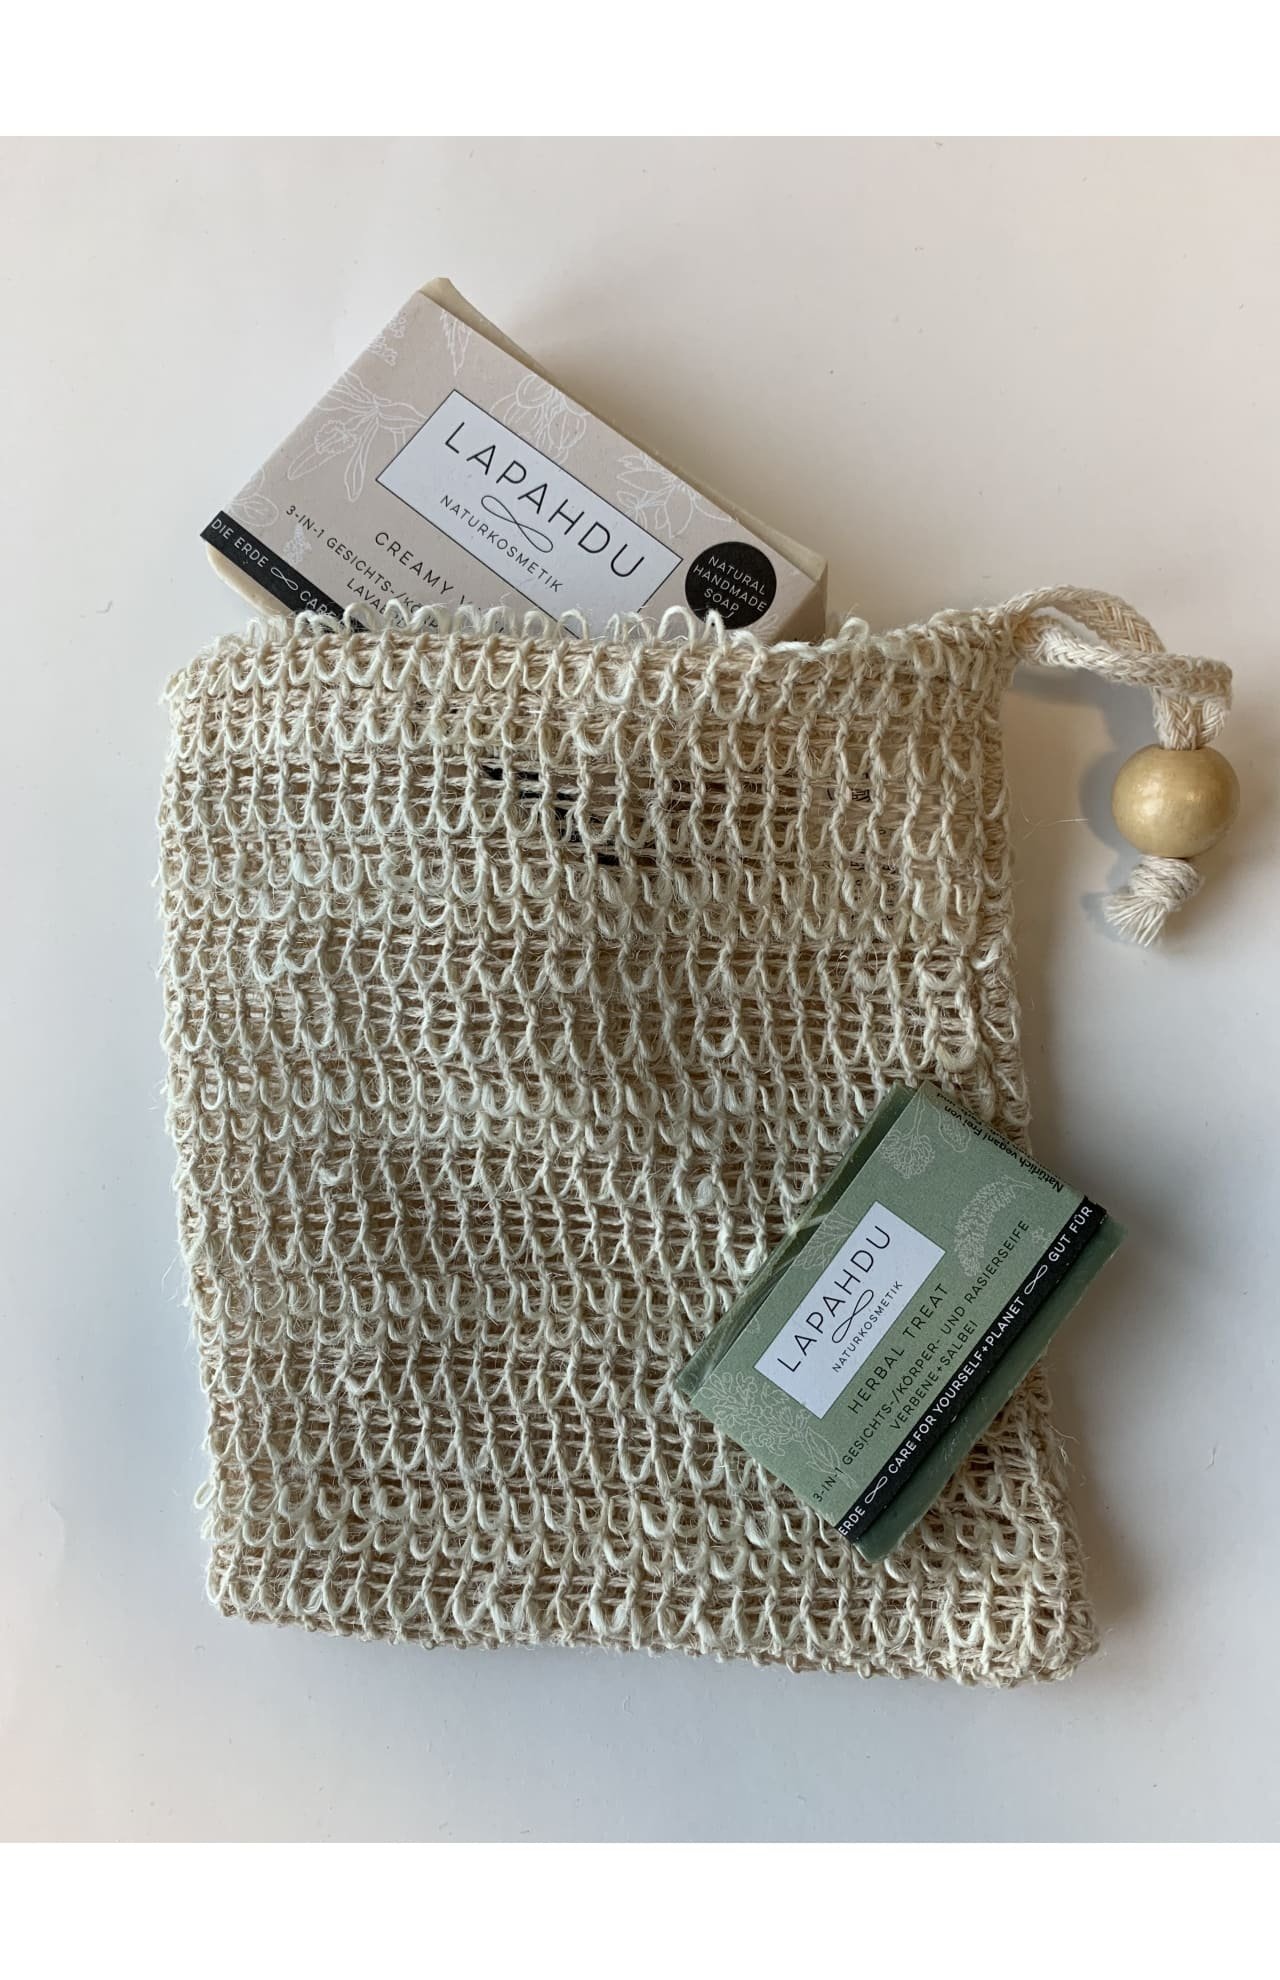 Soap sachets made from ramie cotton